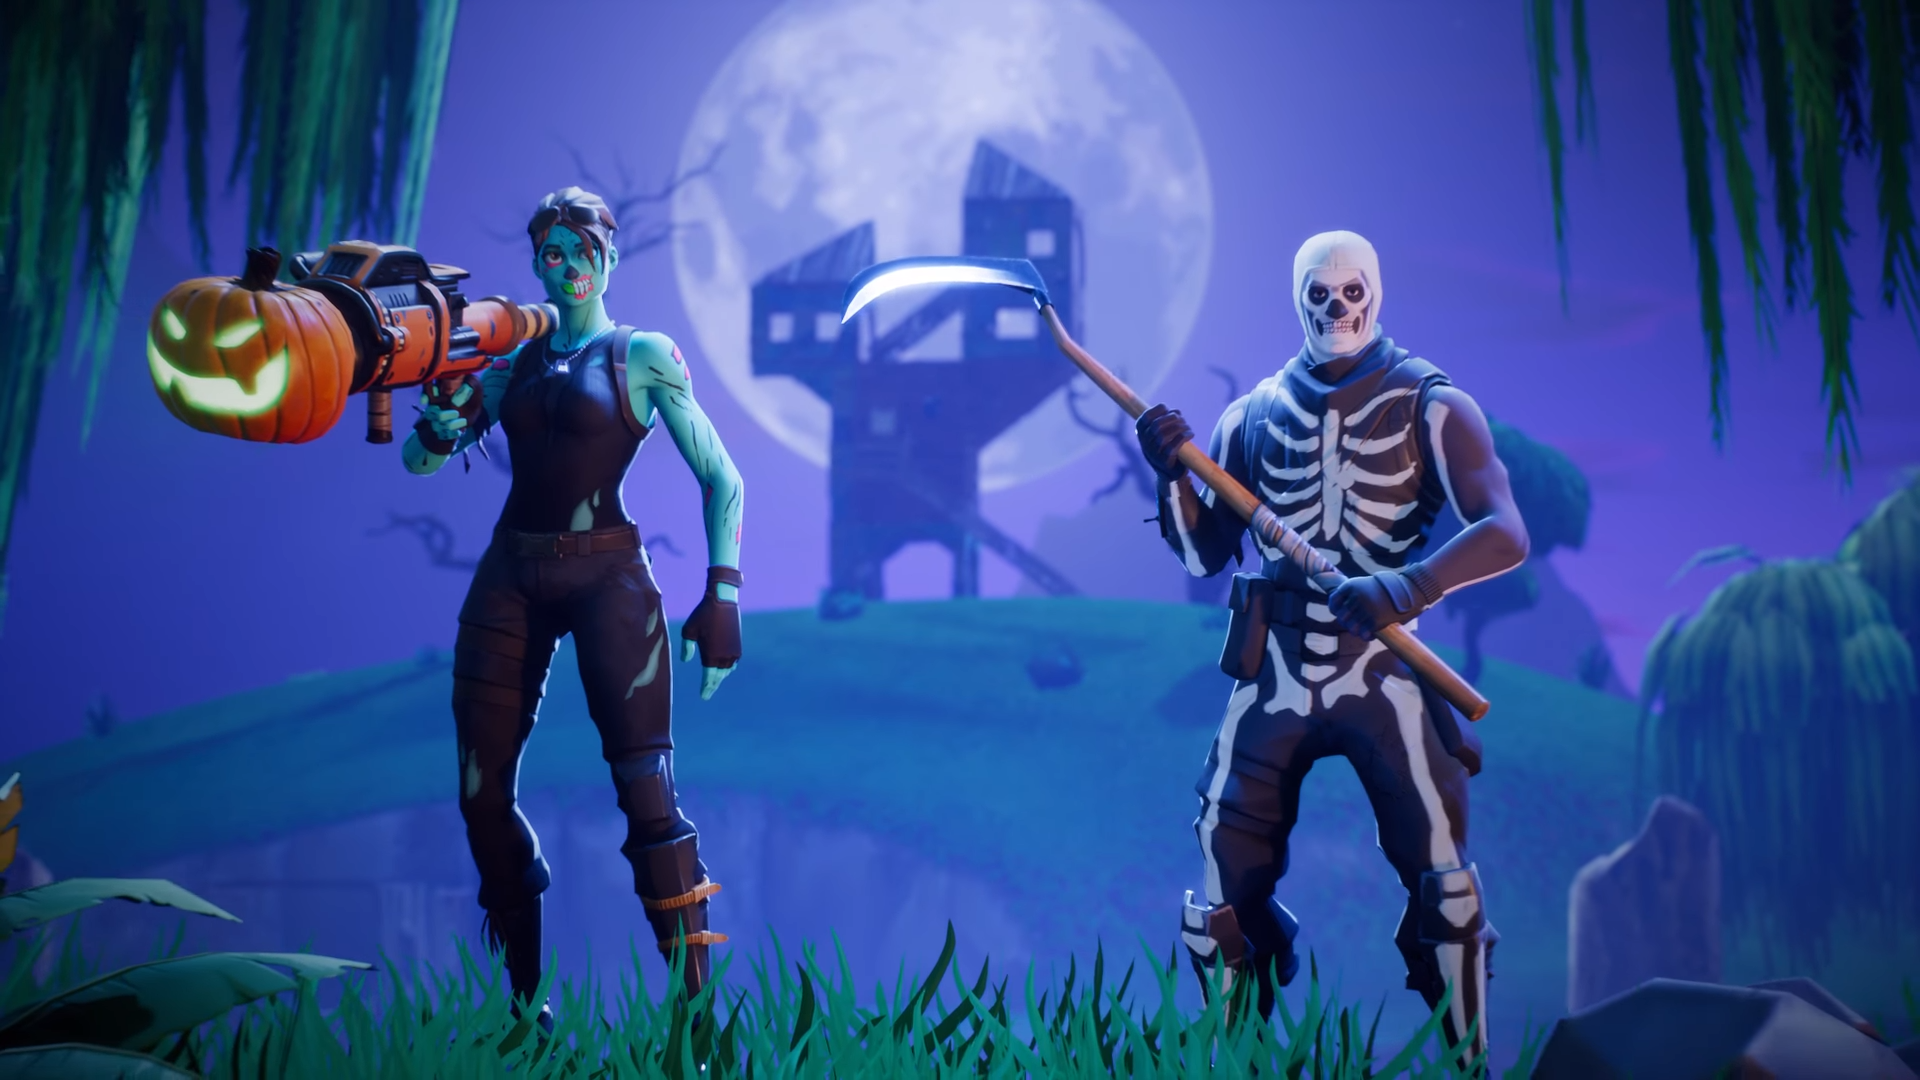 Fortnite's Popularity Has Drastically Increased In Recent ... - 1920 x 1080 png 1486kB